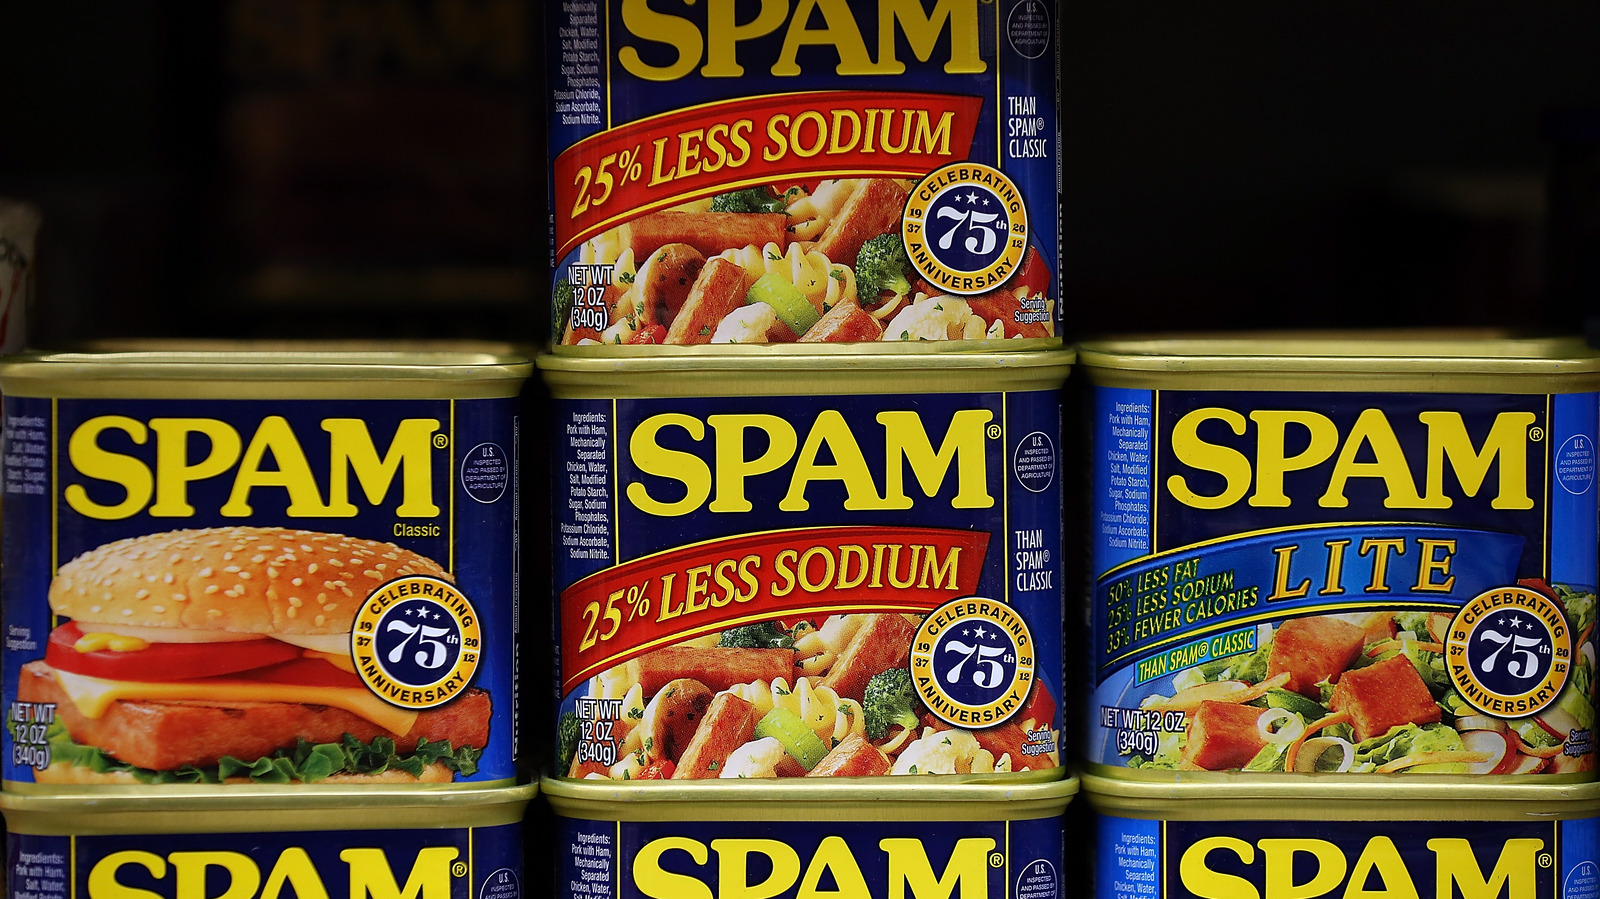 https://www.thedailymeal.com/img/gallery/14-hacks-that-will-change-the-way-you-cook-with-spam/l-intro-1671941553.jpg